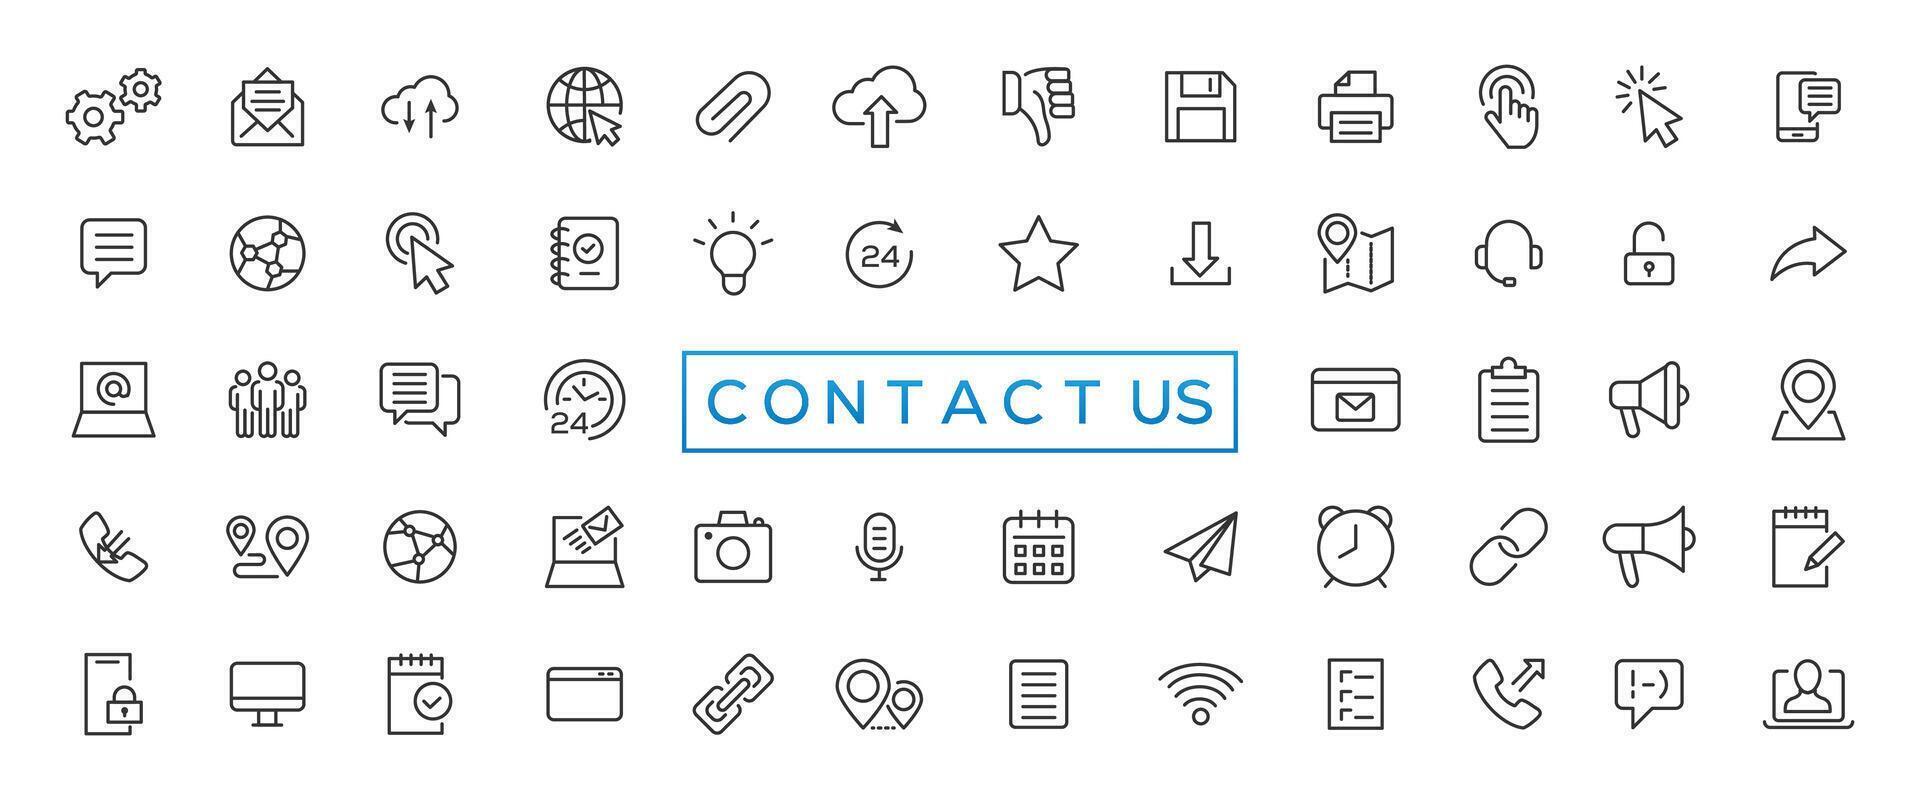 Set of simple Contact us icons for web and mobile app. Social Media network icon call us email mobile signs. Customer service. Contact support sign and symbols vector